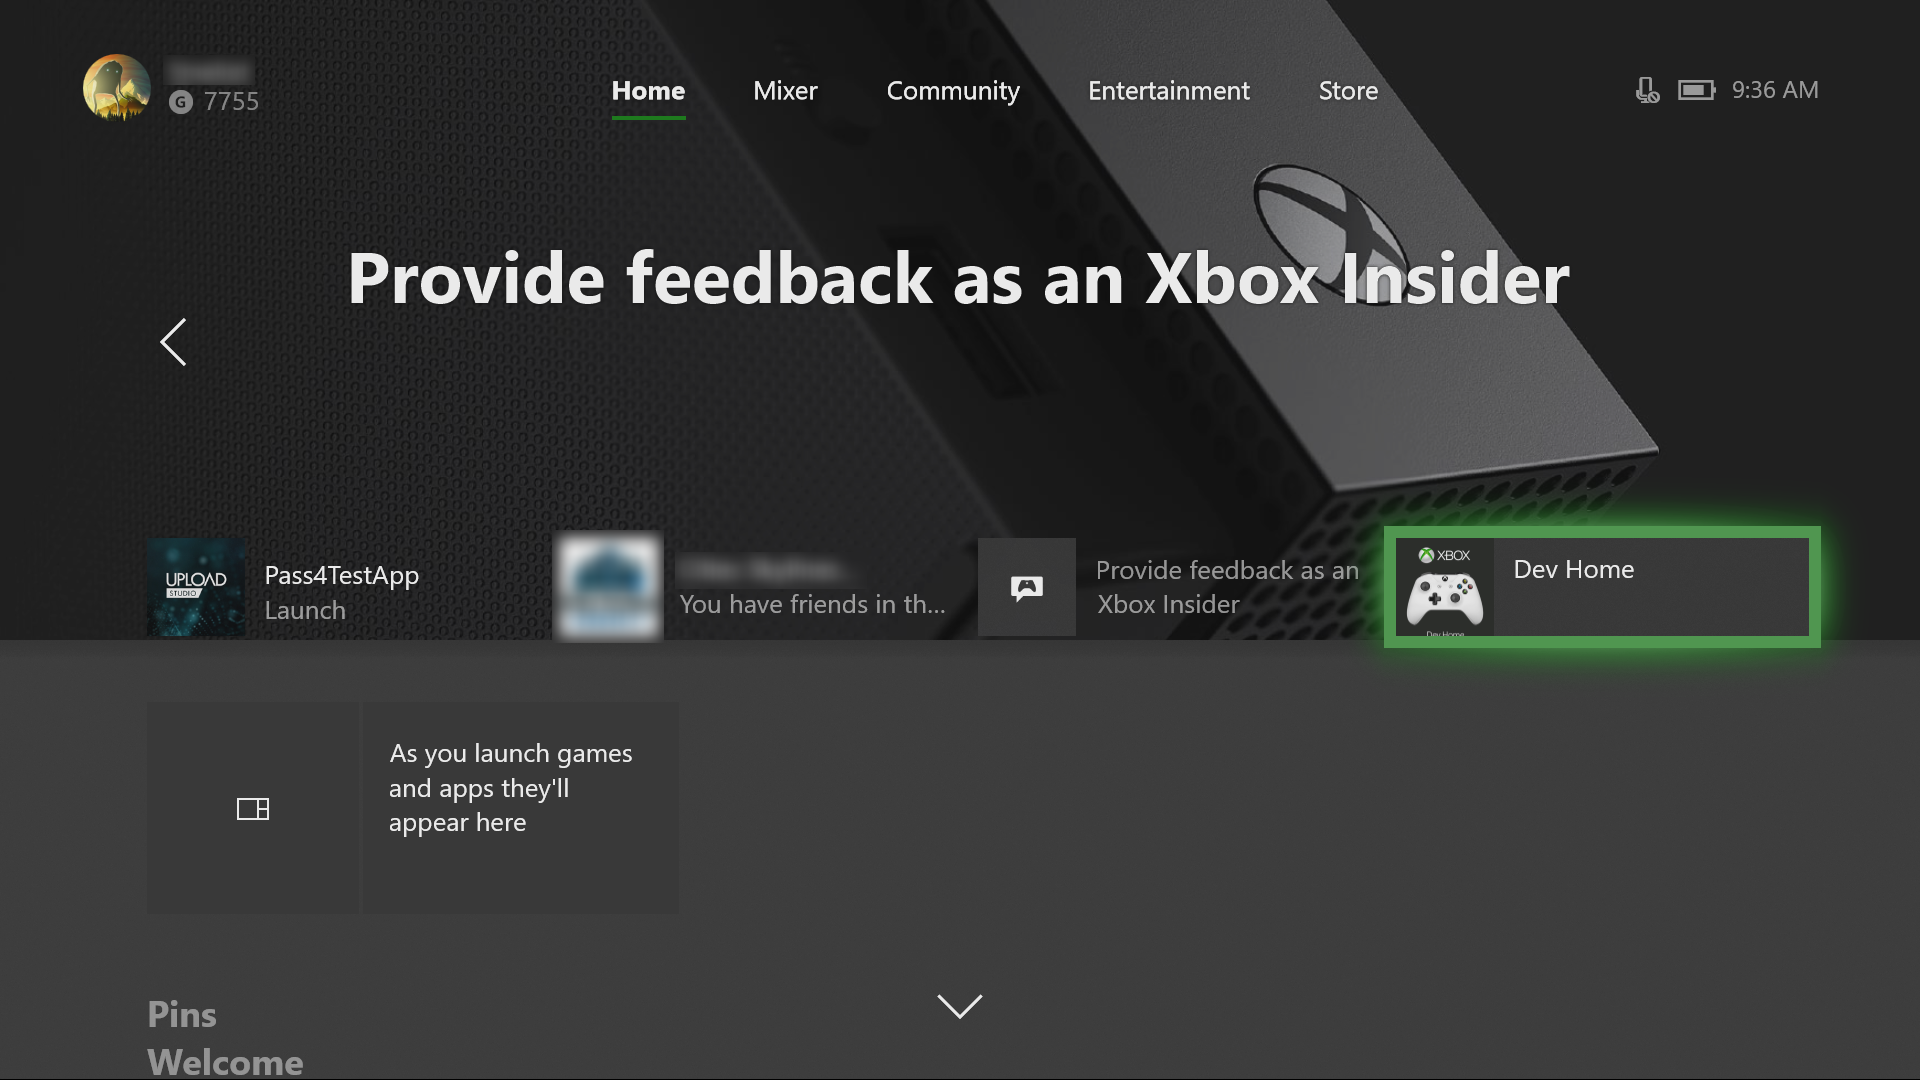 Présentation des outils Xbox One - UWP applications | Microsoft Learn